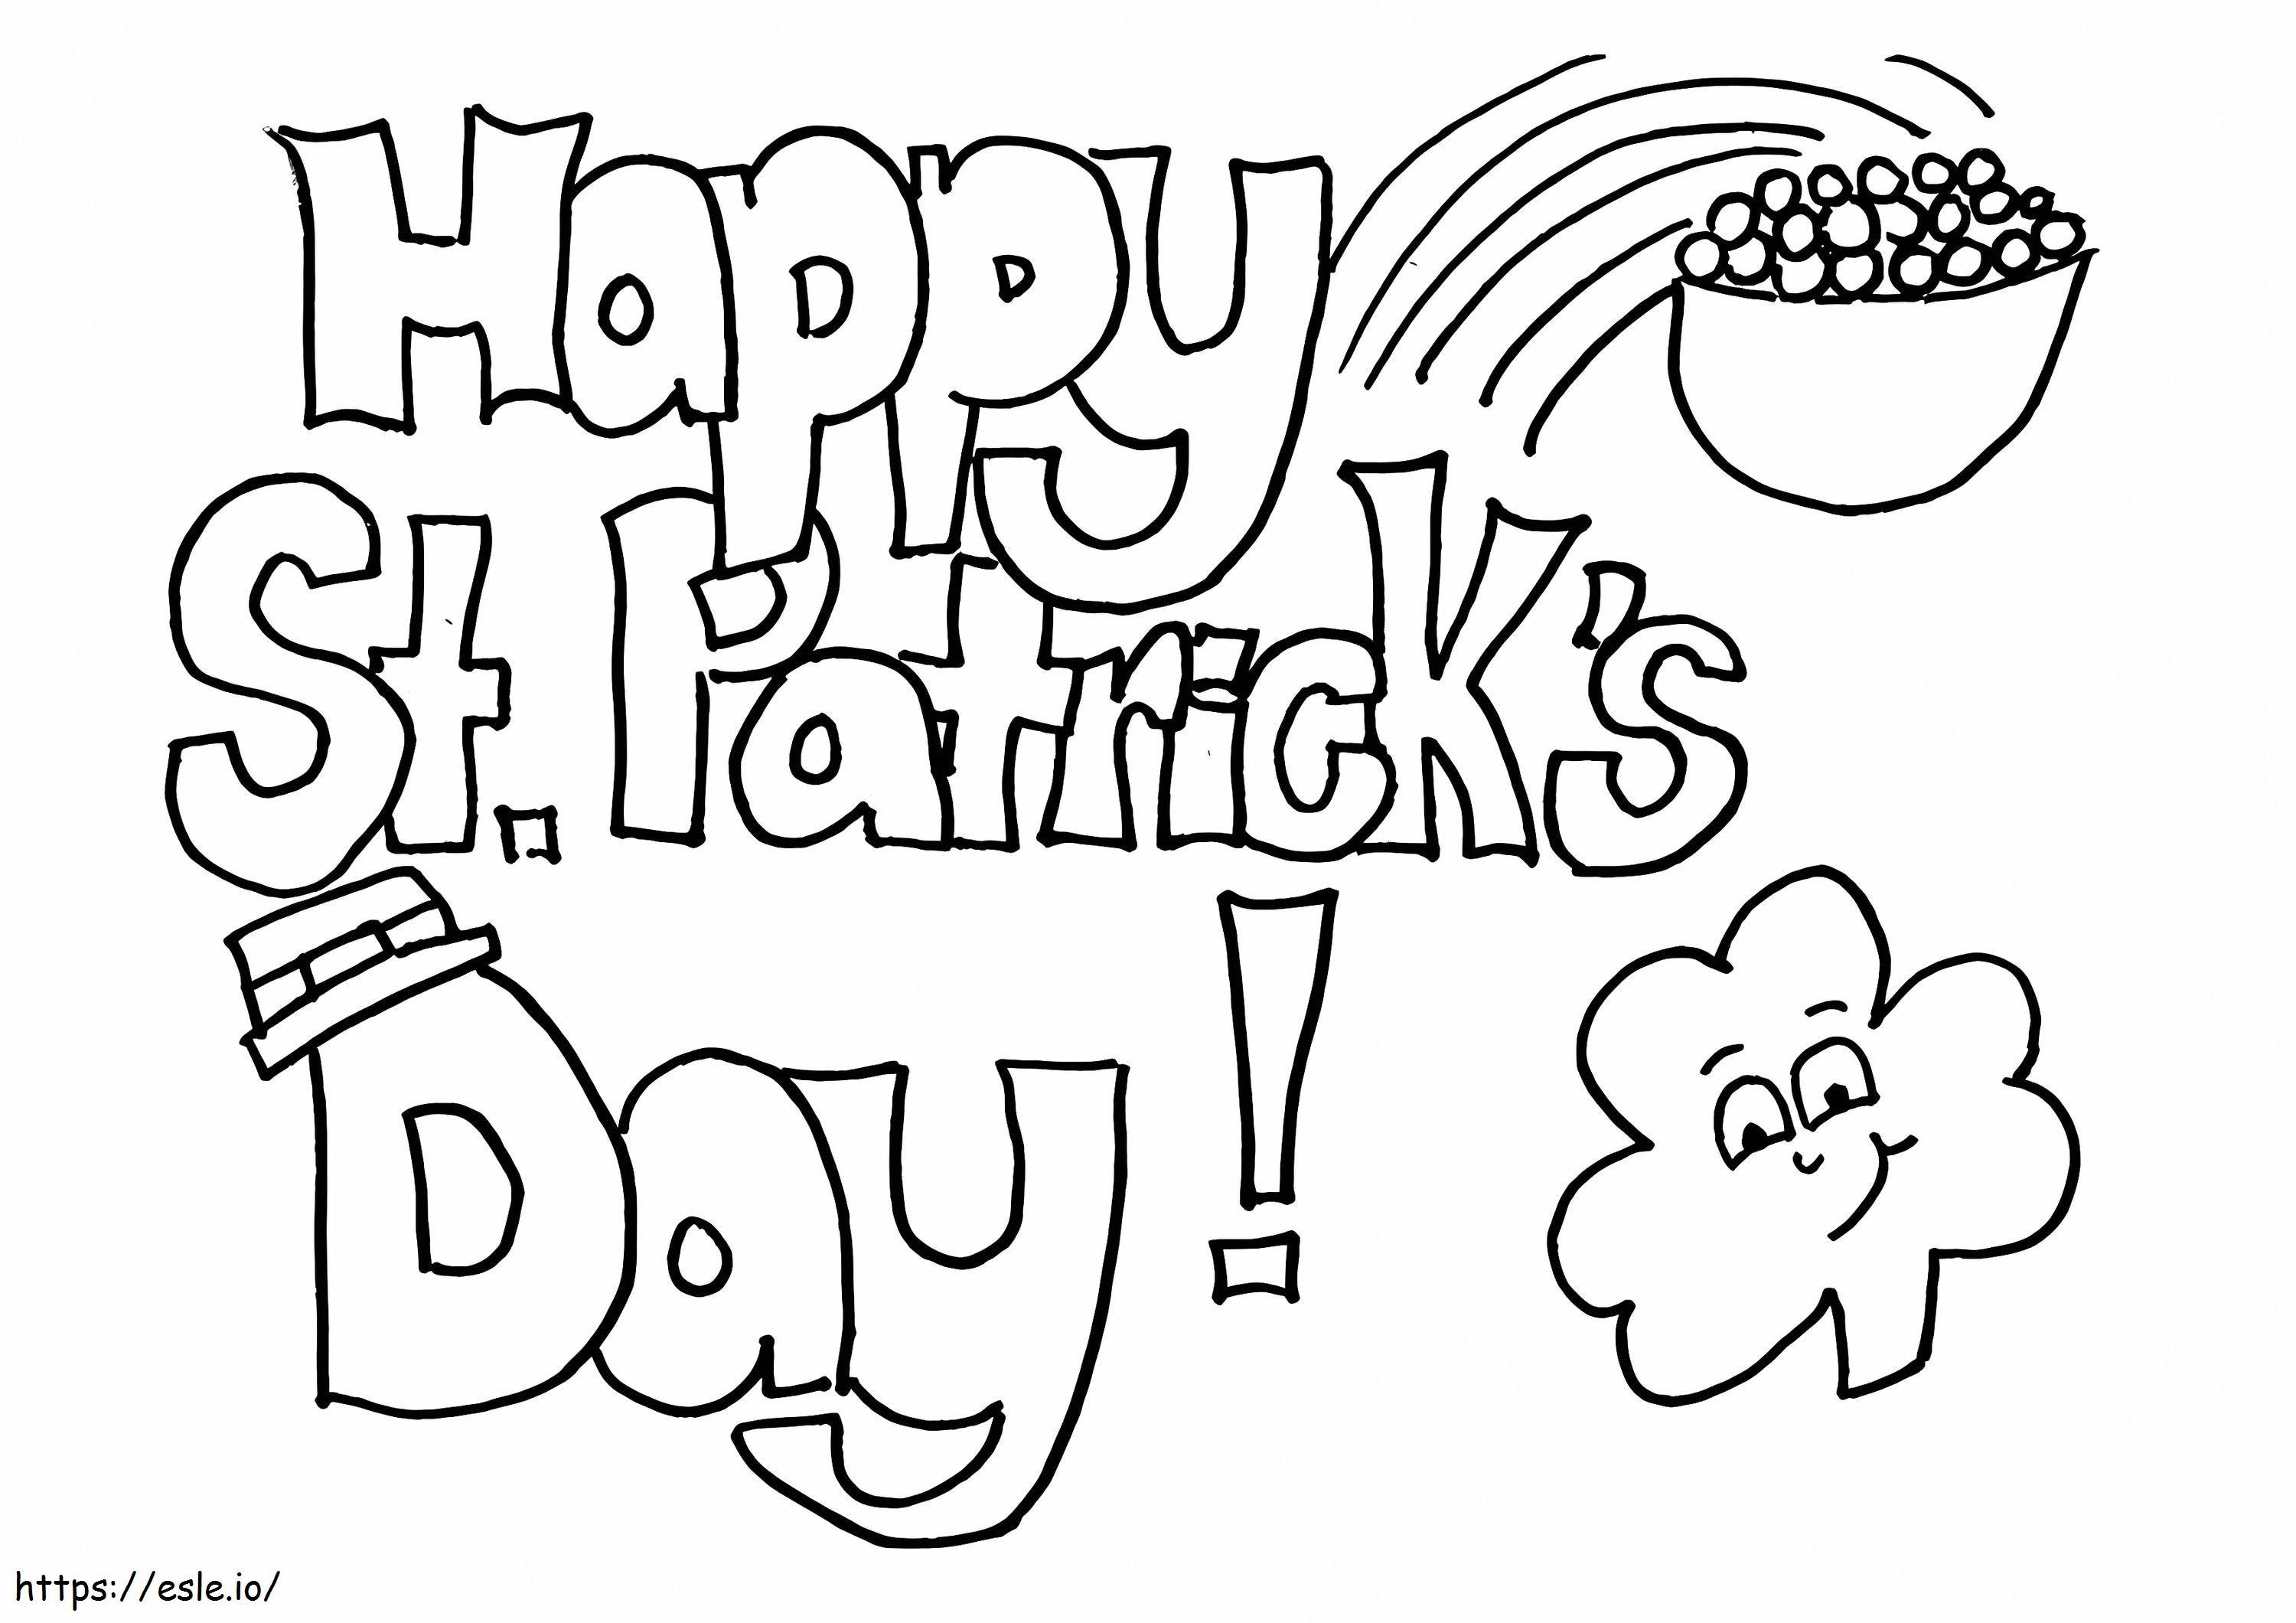 The Happy St Patrick S Day A4 E1600442906495 coloring page